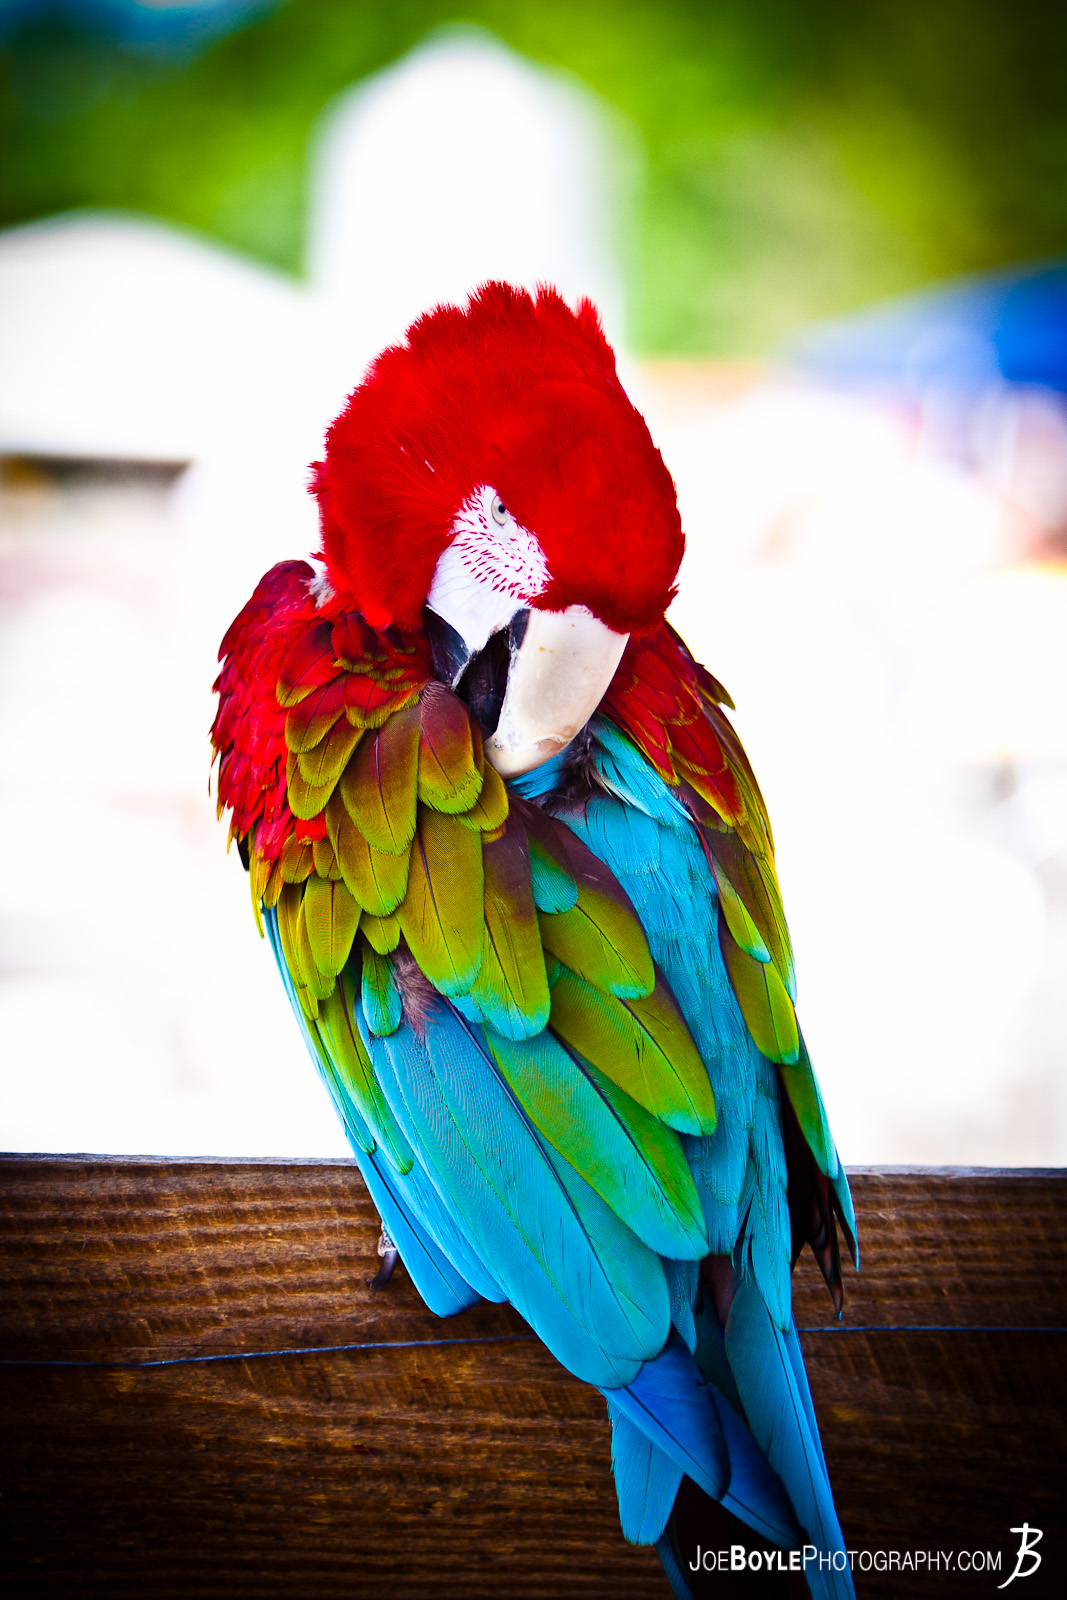  While at a farm photographing some of the wildlife I was able to capture this very colorful Macaw parrot preening itself! 